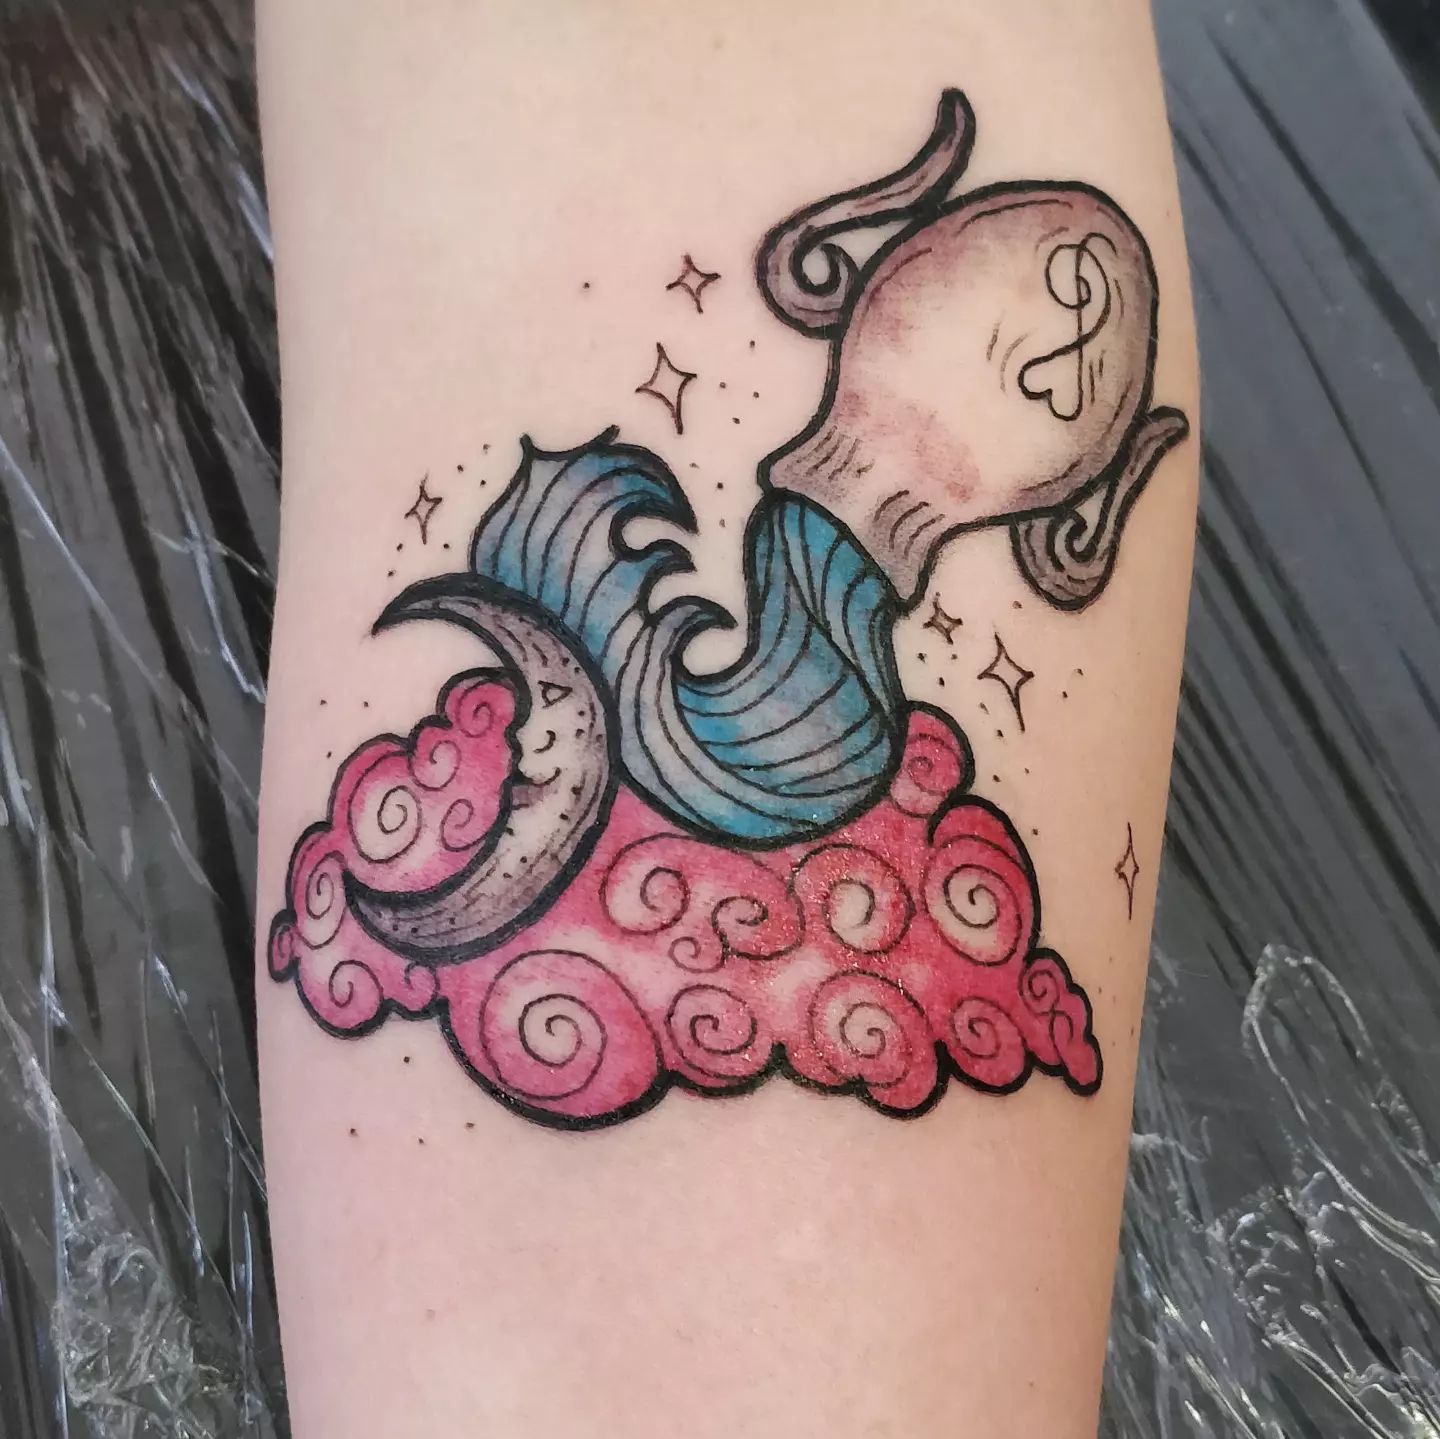 Are you ready to get a colorful zodiac sign tattoo? The water you bear is poured out to an imaginative cloud, which is pink. We all know that you guys are crazy and you think different than most of the people. It is time to be crazy for your tattoo this time!